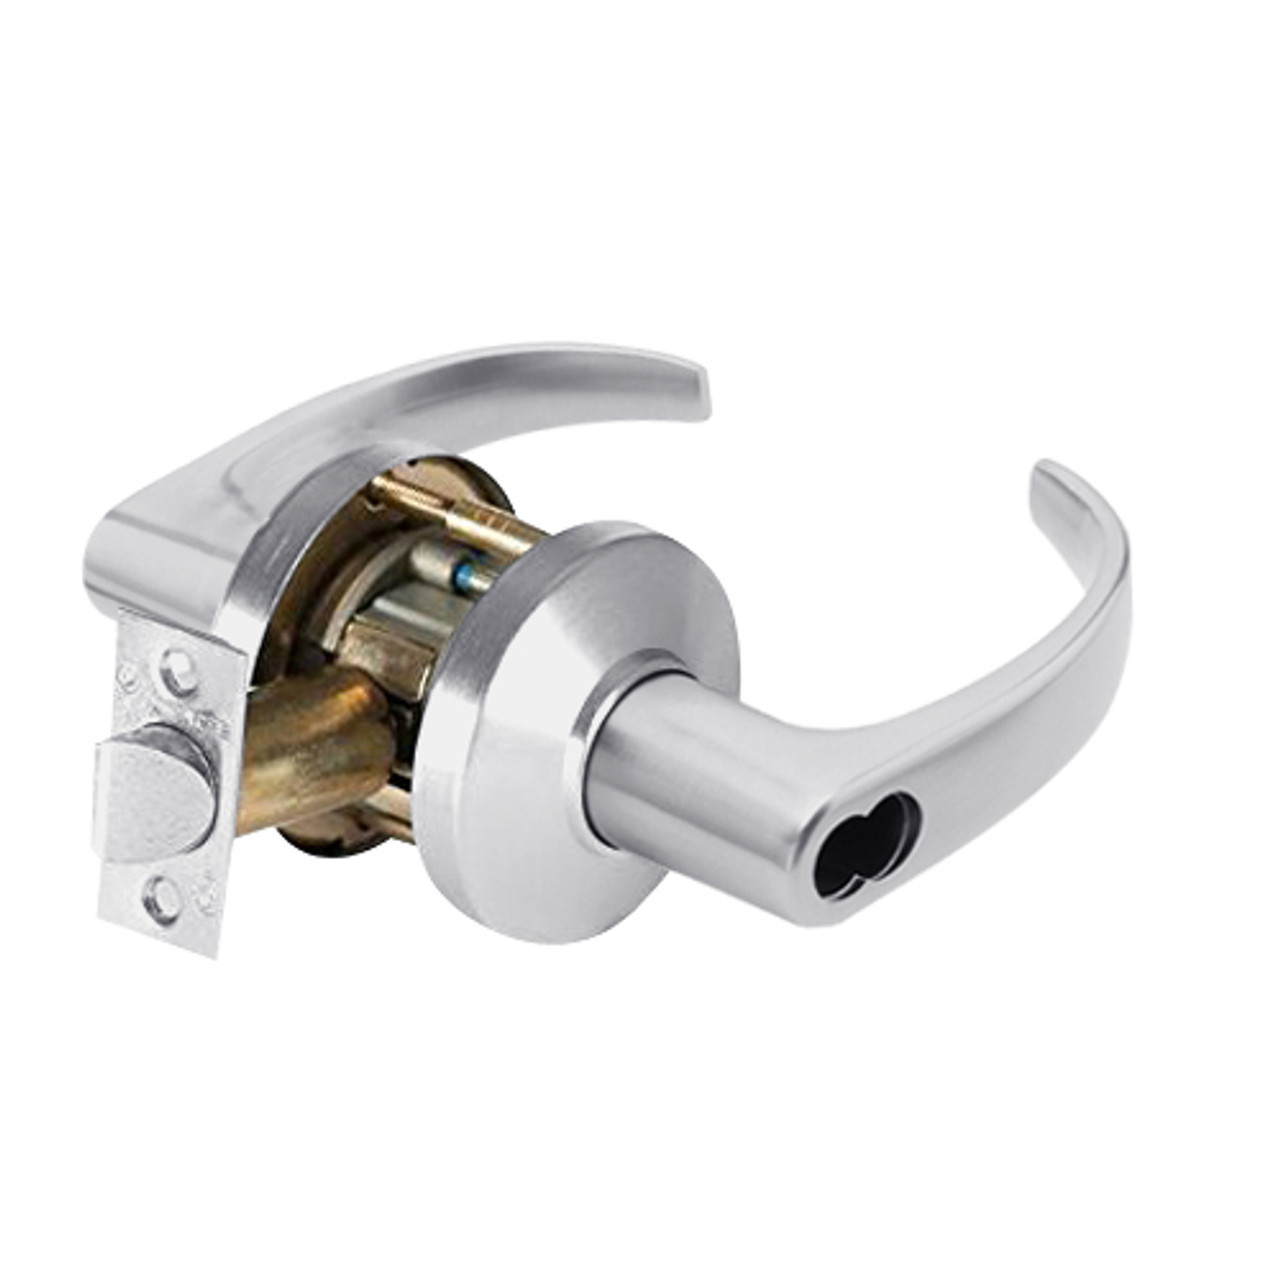 9K37XR14CSTK626LM Best 9K Series Special Function Cylindrical Lever Locks with Curved with Return Lever Design Accept 7 Pin Best Core in Satin Chrome